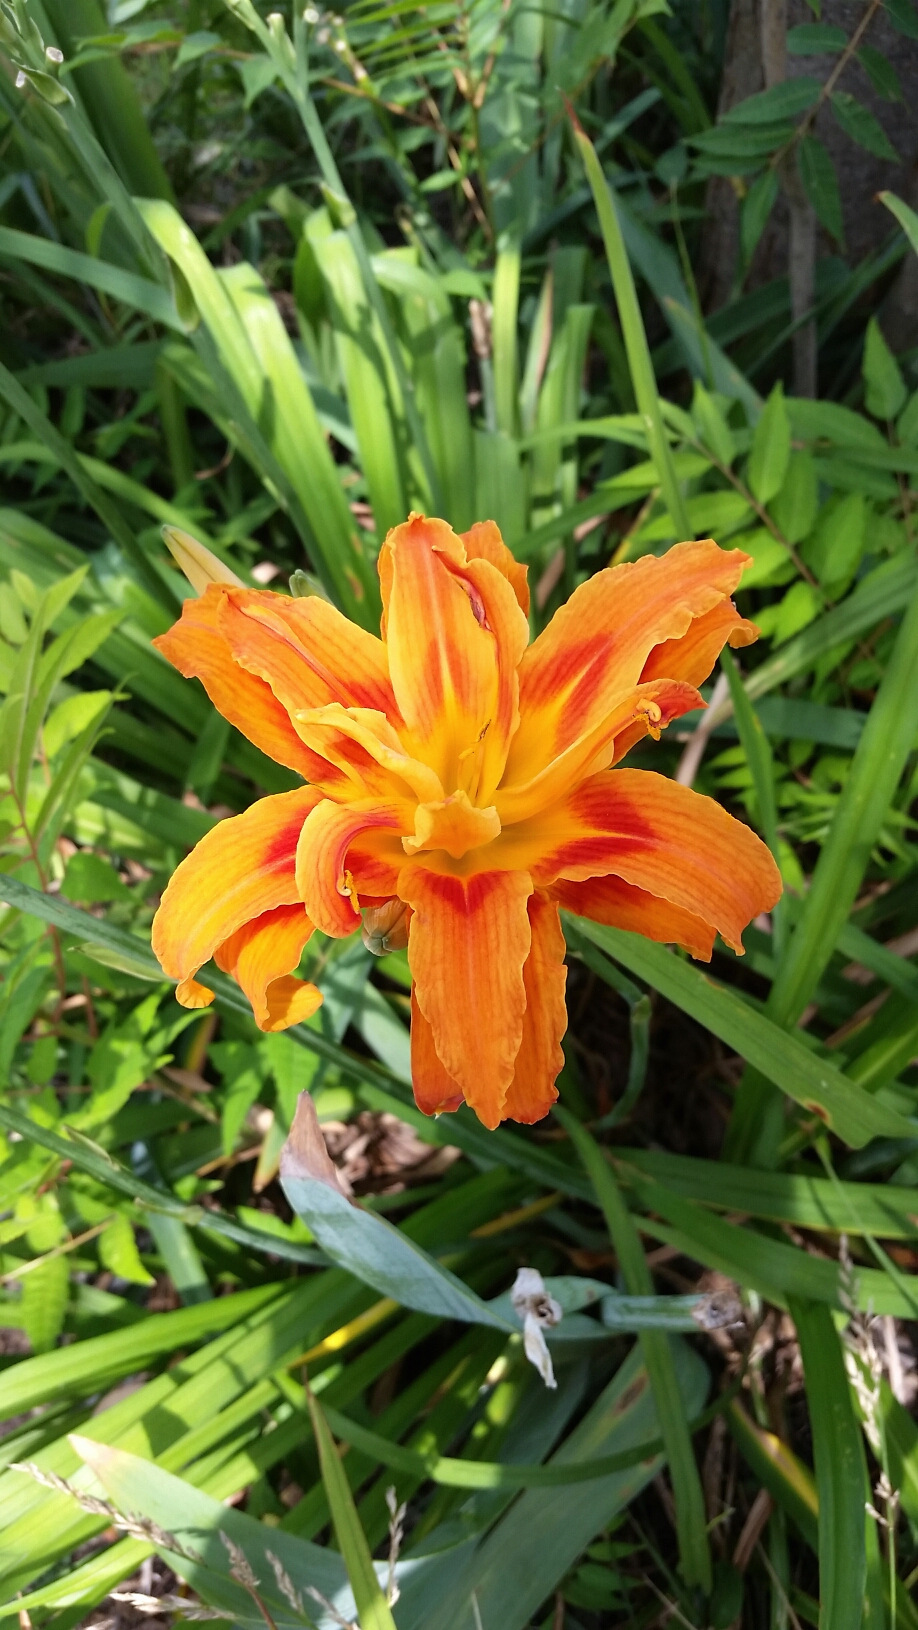 Orange daylilly with frilly petals